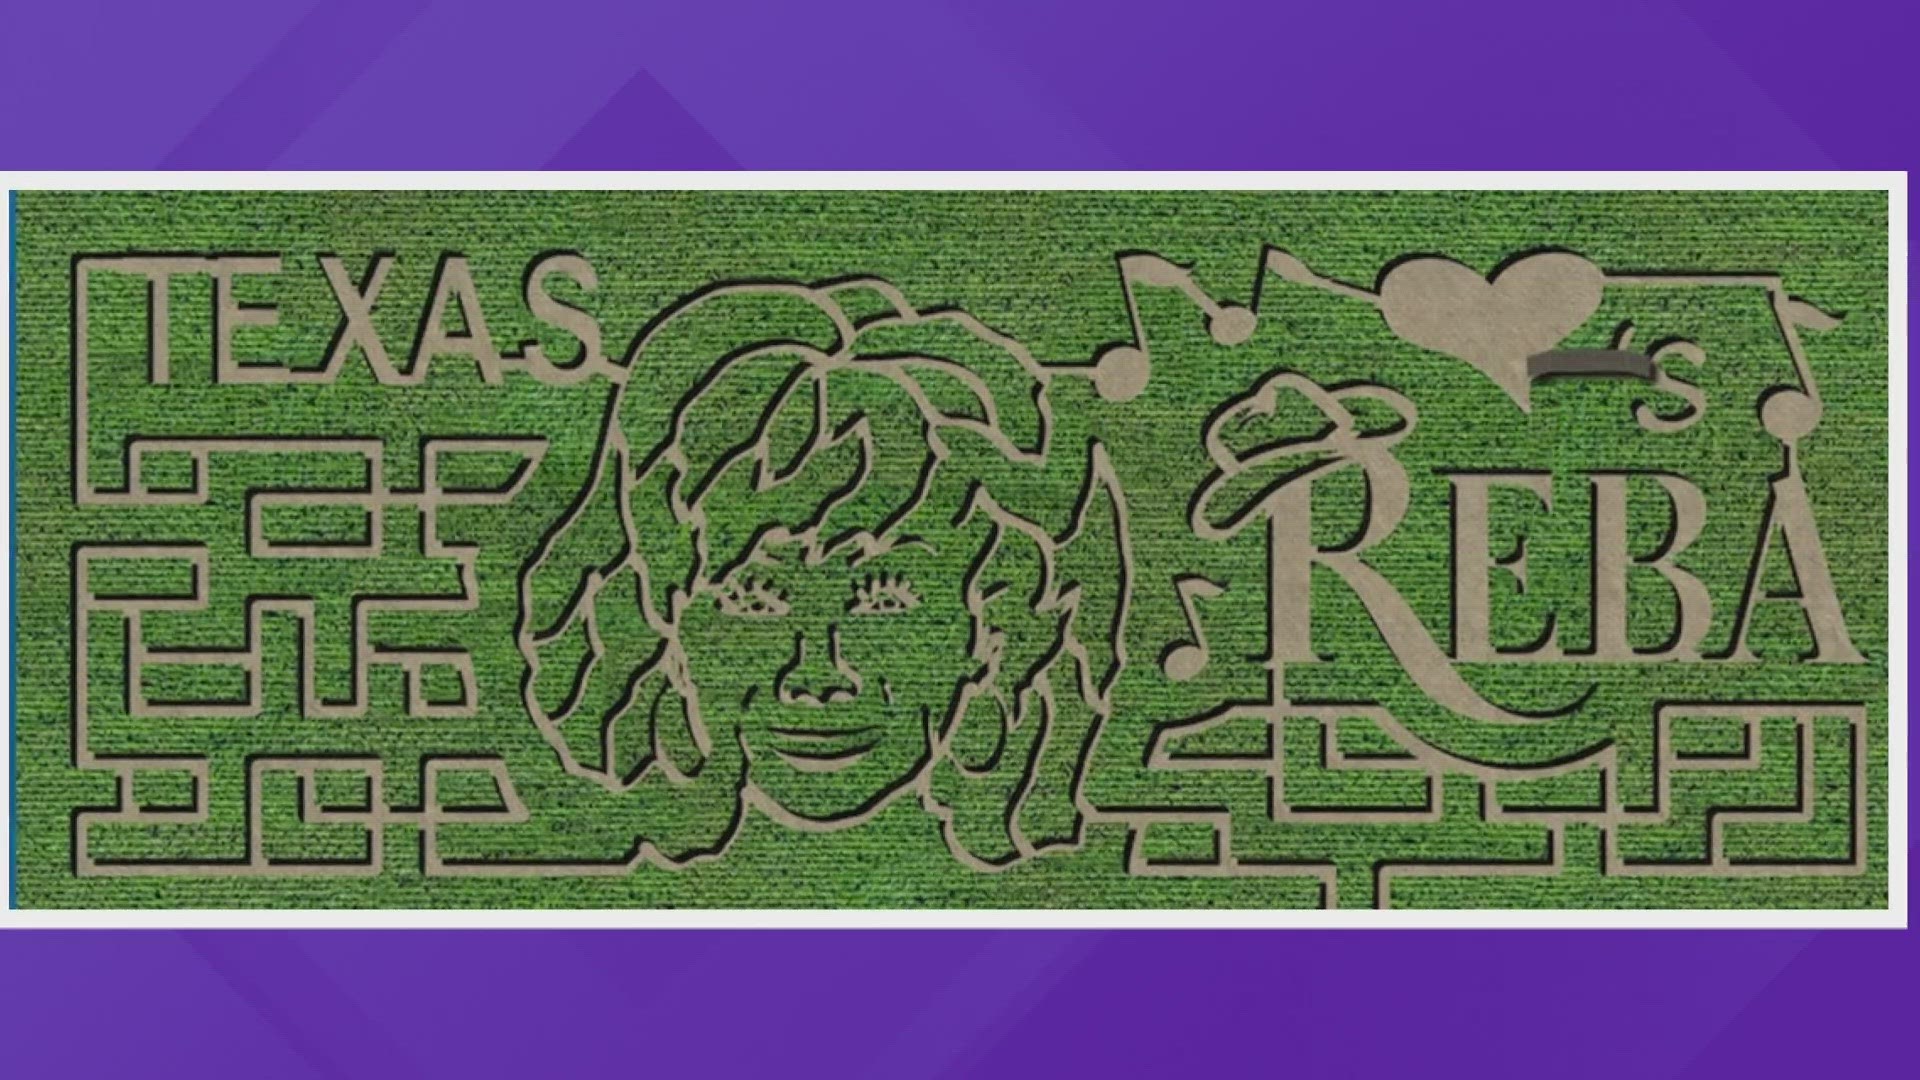 The corn maze at Jenschke Orchards opens on September 15. The design includes her name, Reba, along with a cowboy hat and a heart.